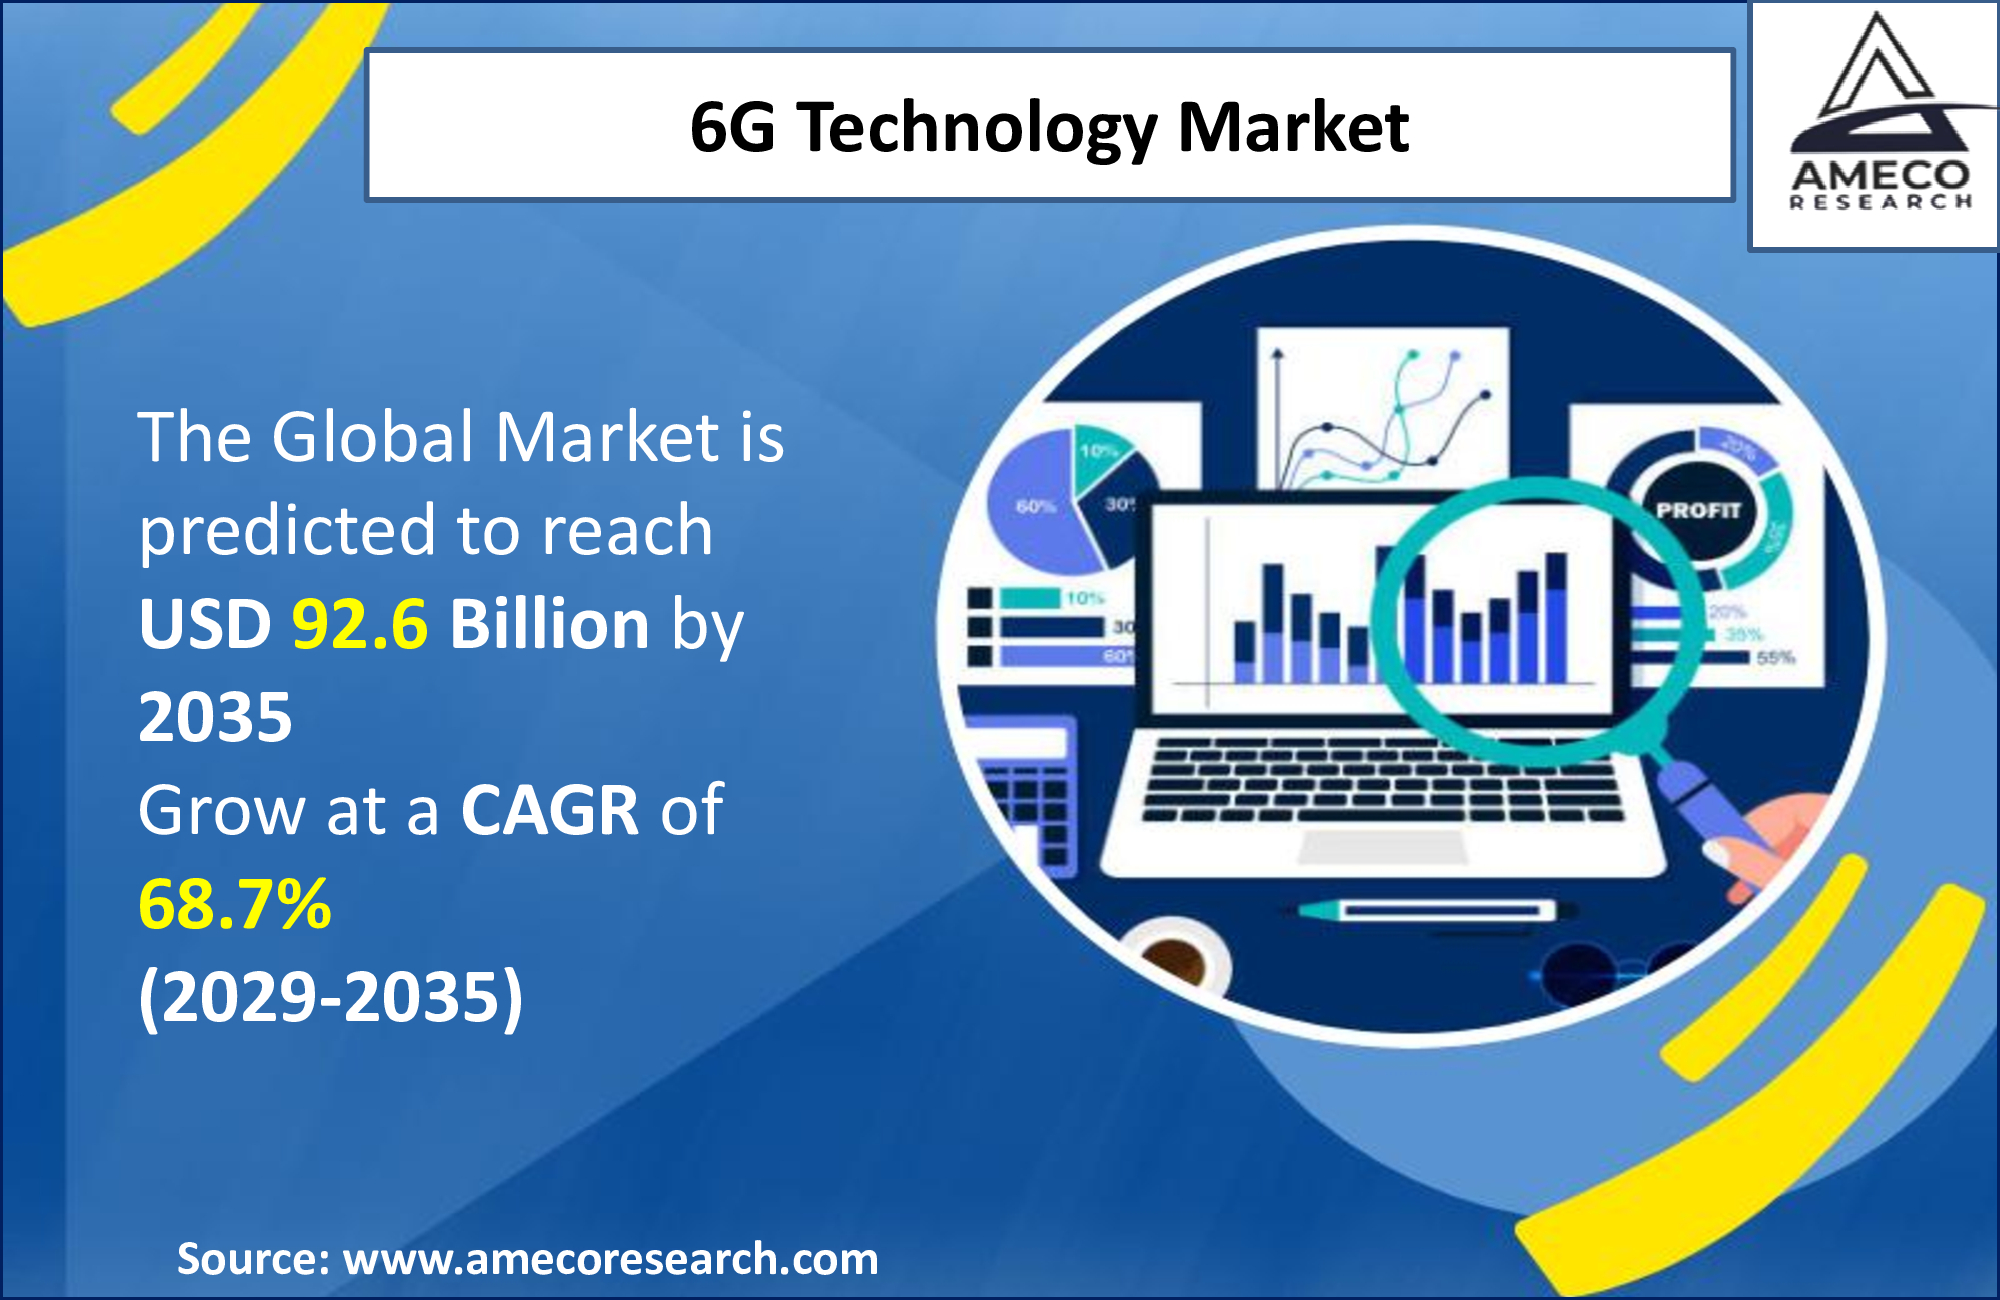 6G Technology Market Size and Growth